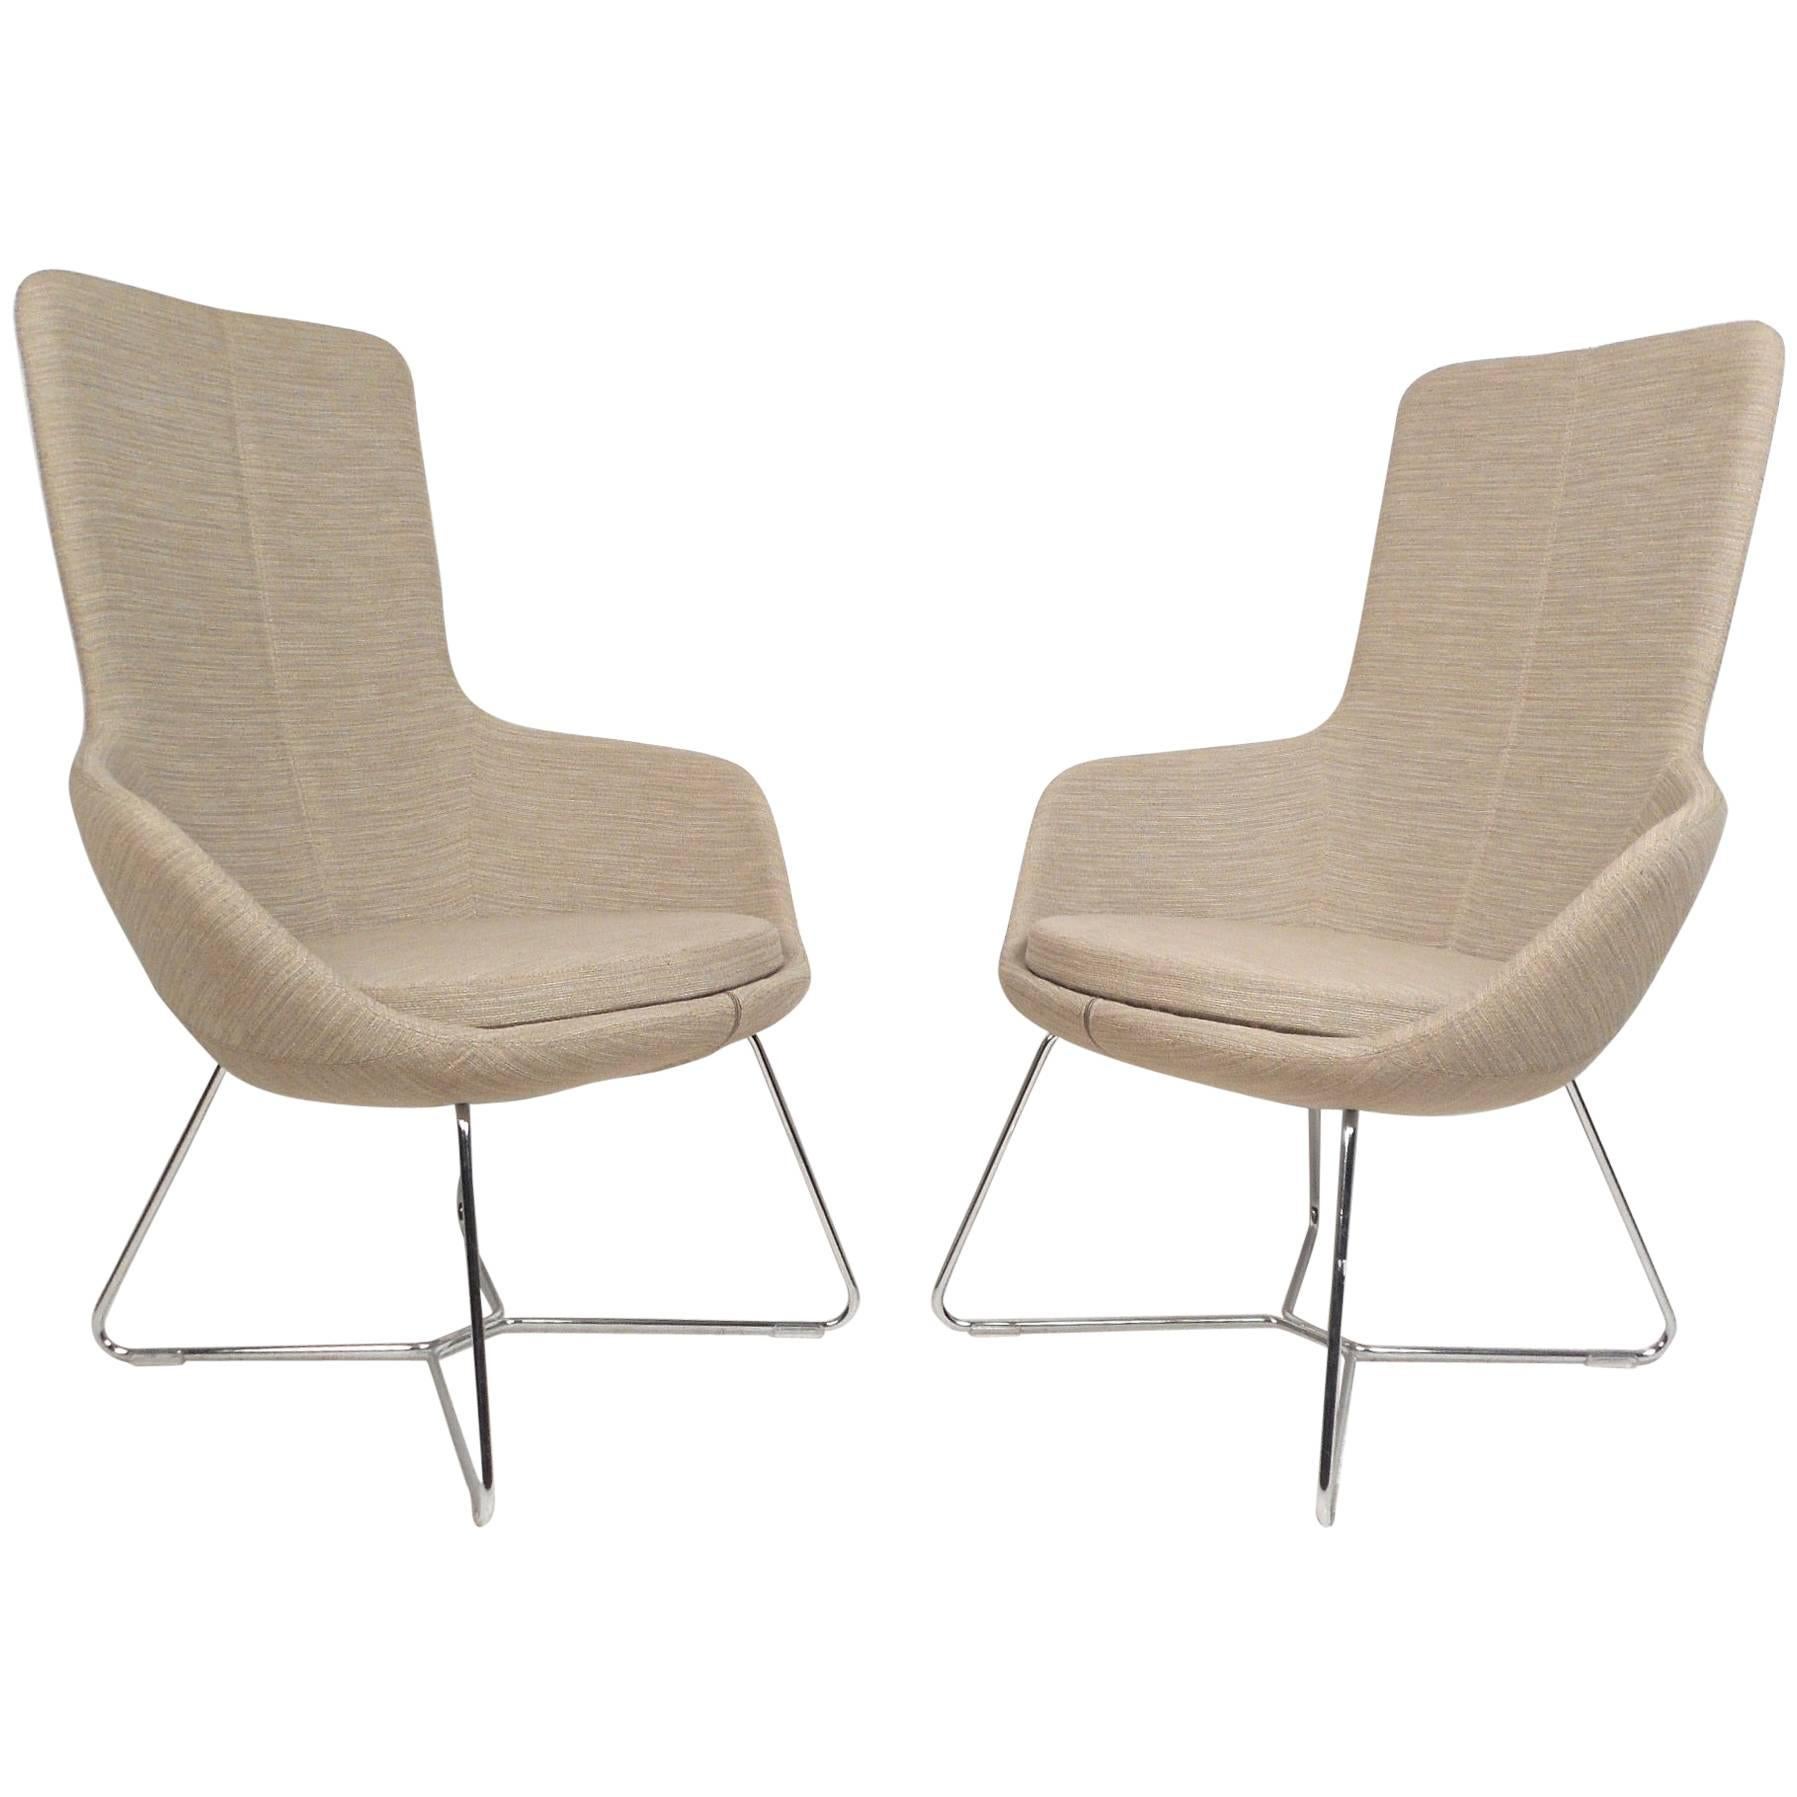 Pair of Mid-Century Style High back Lounge Chairs